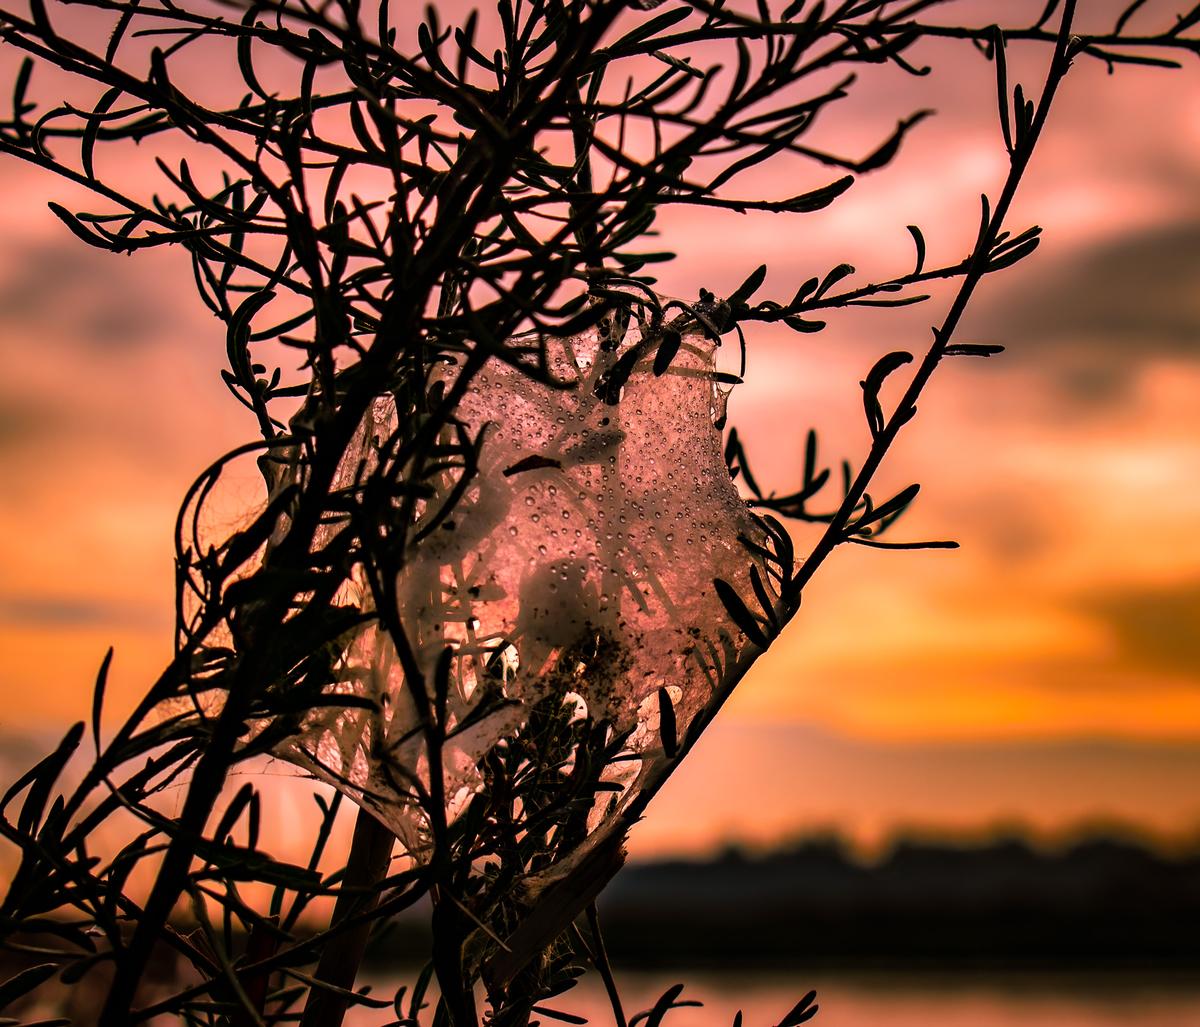 Abby Cullinan;Sunset Web;This gives you a spooky feeling with the blood red sunset, the spooky web and the tear droplets.